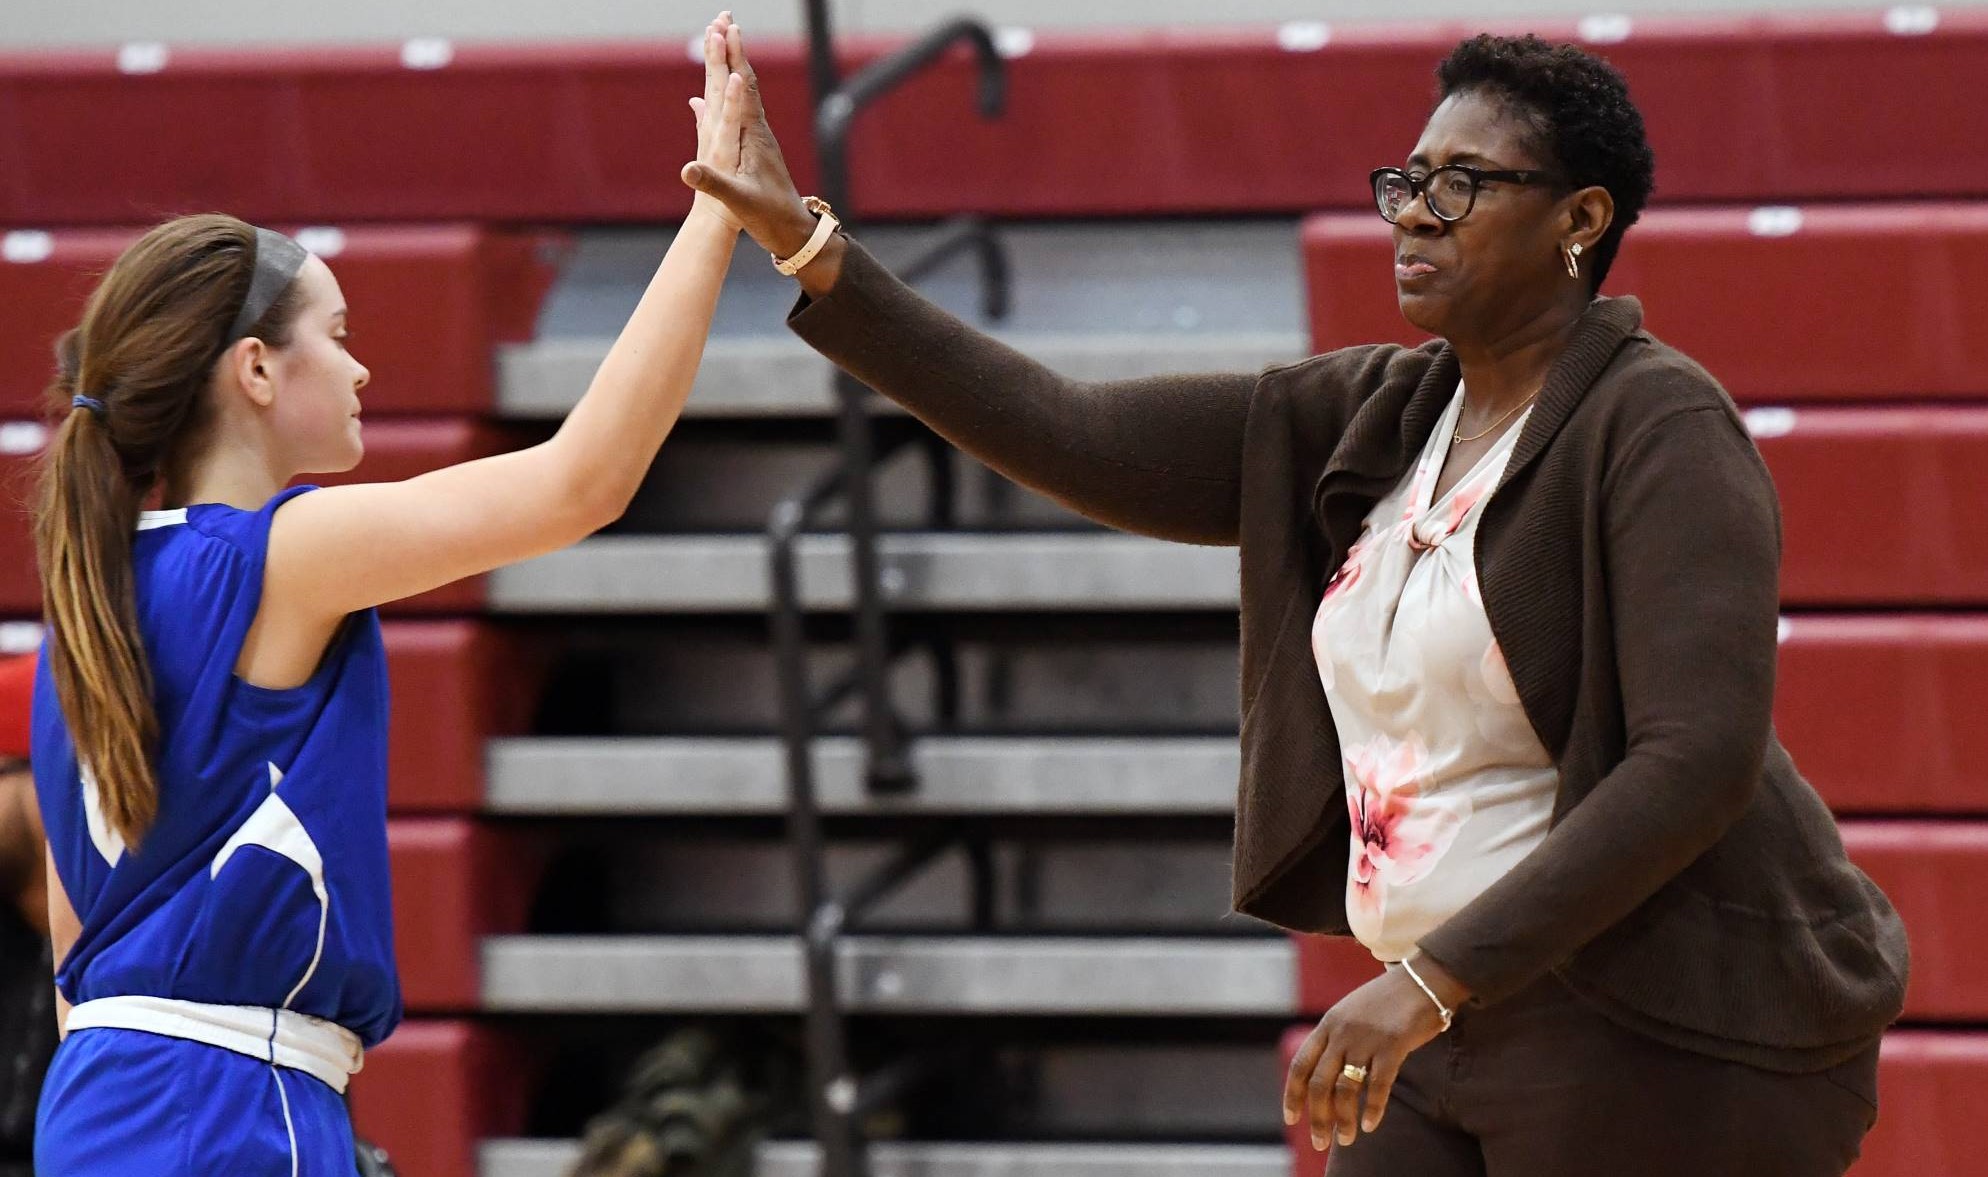 Women's Basketball photo of coach high-fiving player